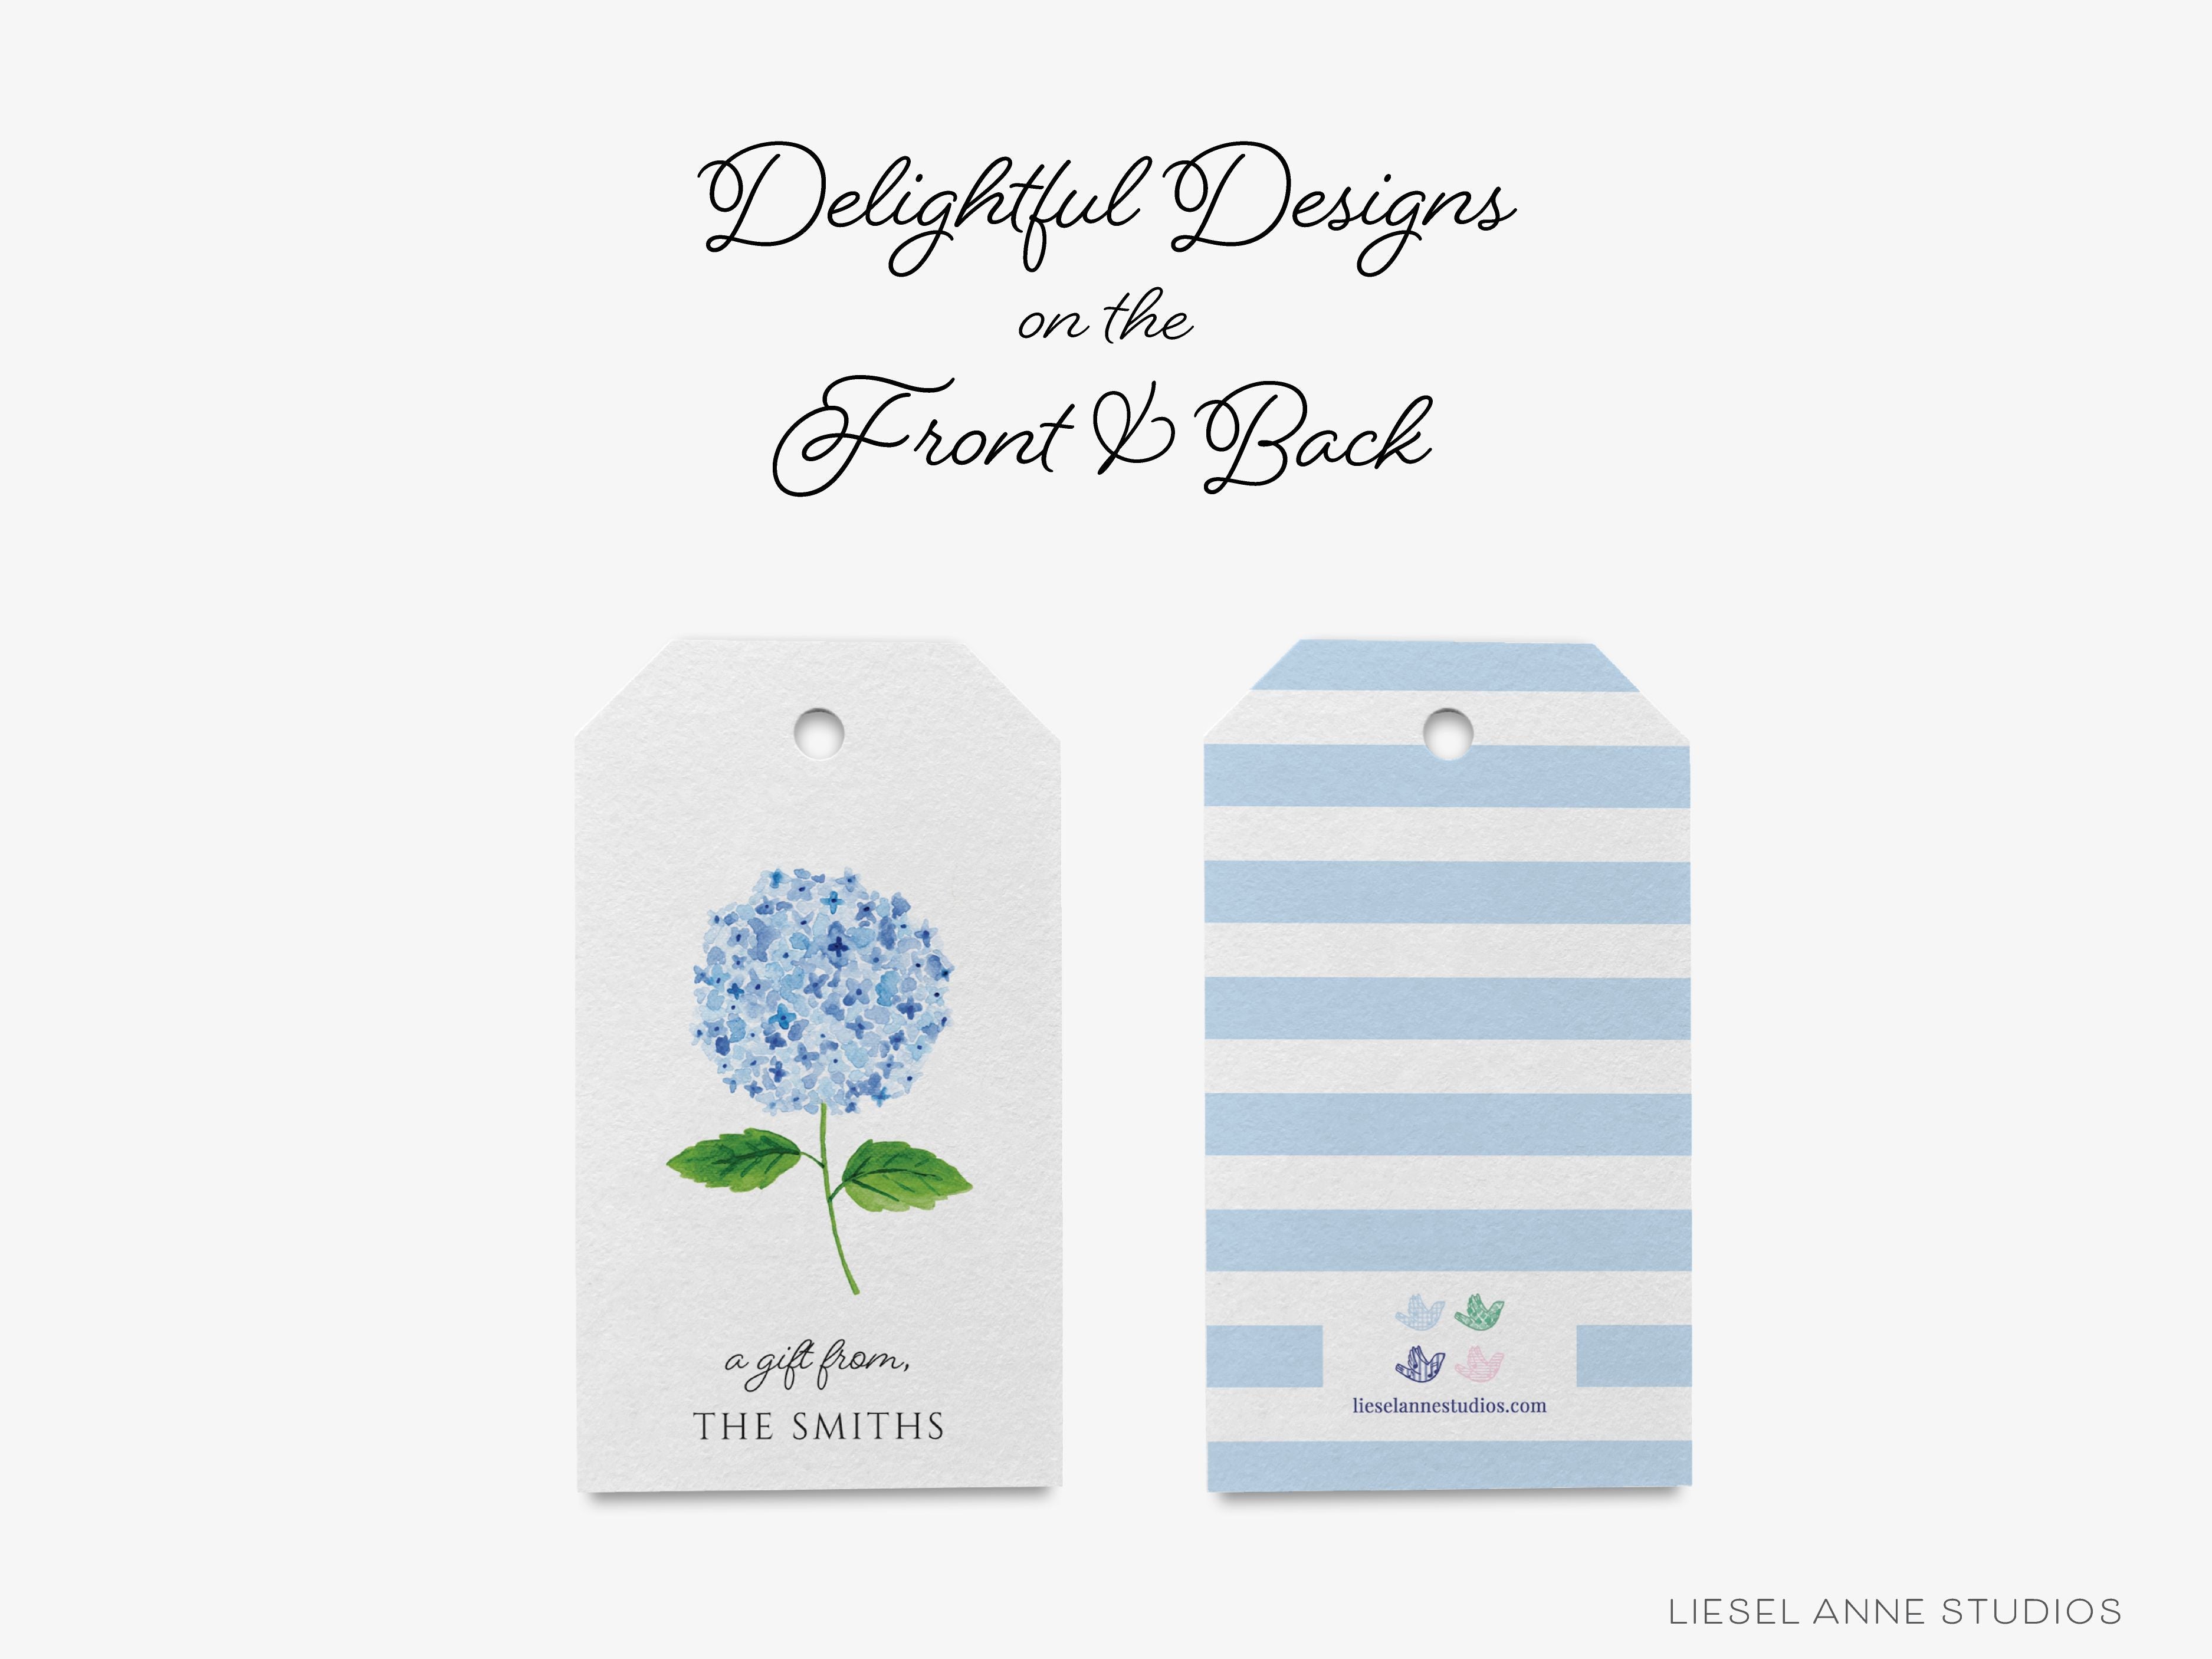 Personalized Hydrangea Gift Tags-These gift tags come in sets, hole-punched with white twine and feature our hand-painted watercolor hydrangeas, printed in the USA on 120lb textured stock. They make great tags for gifting or gifts for the floral lover in your life.-The Singing Little Bird